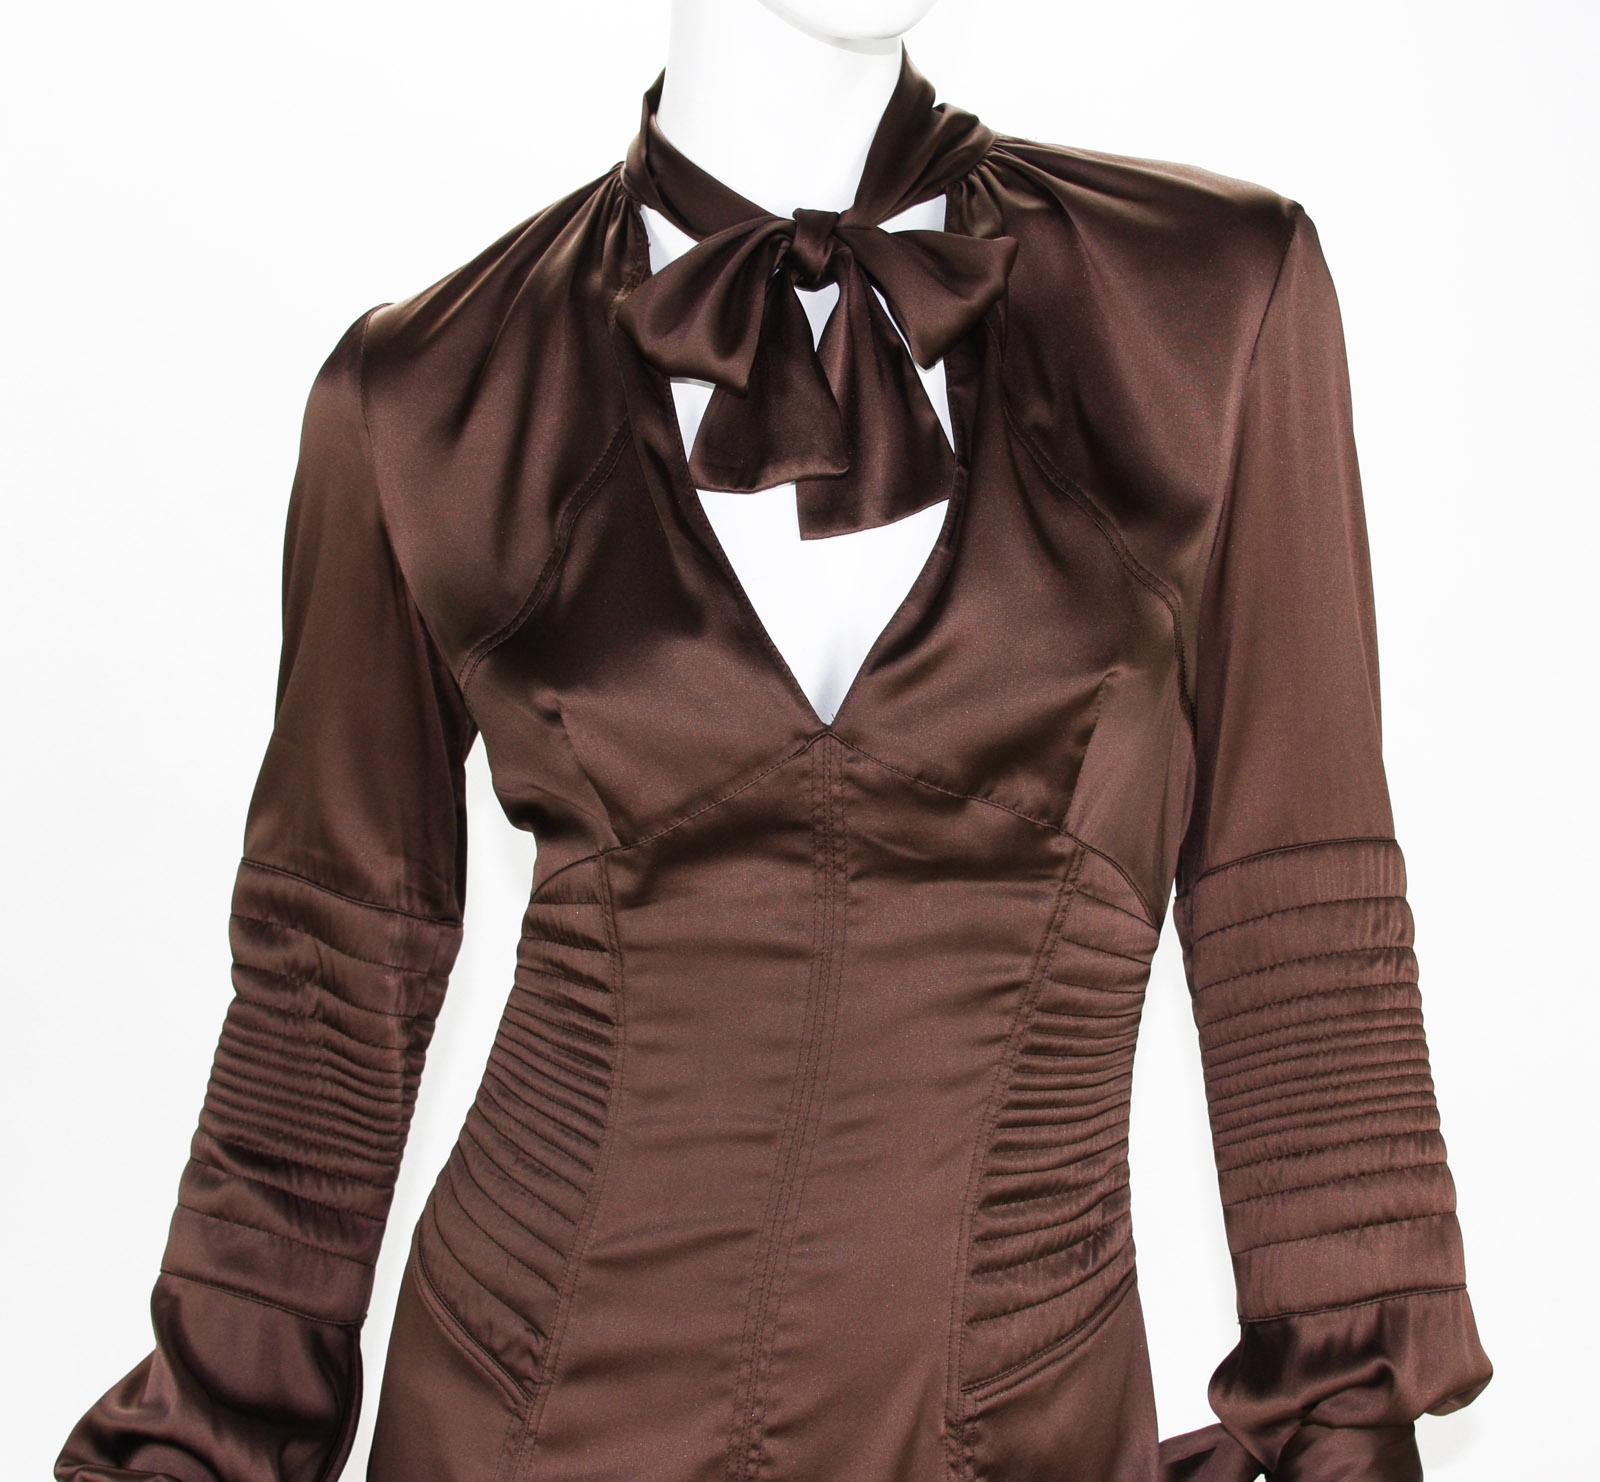 Black Very Rare Tom Ford for Gucci 2003 Collection Silk Brown Bow Dress as seen on JLO For Sale